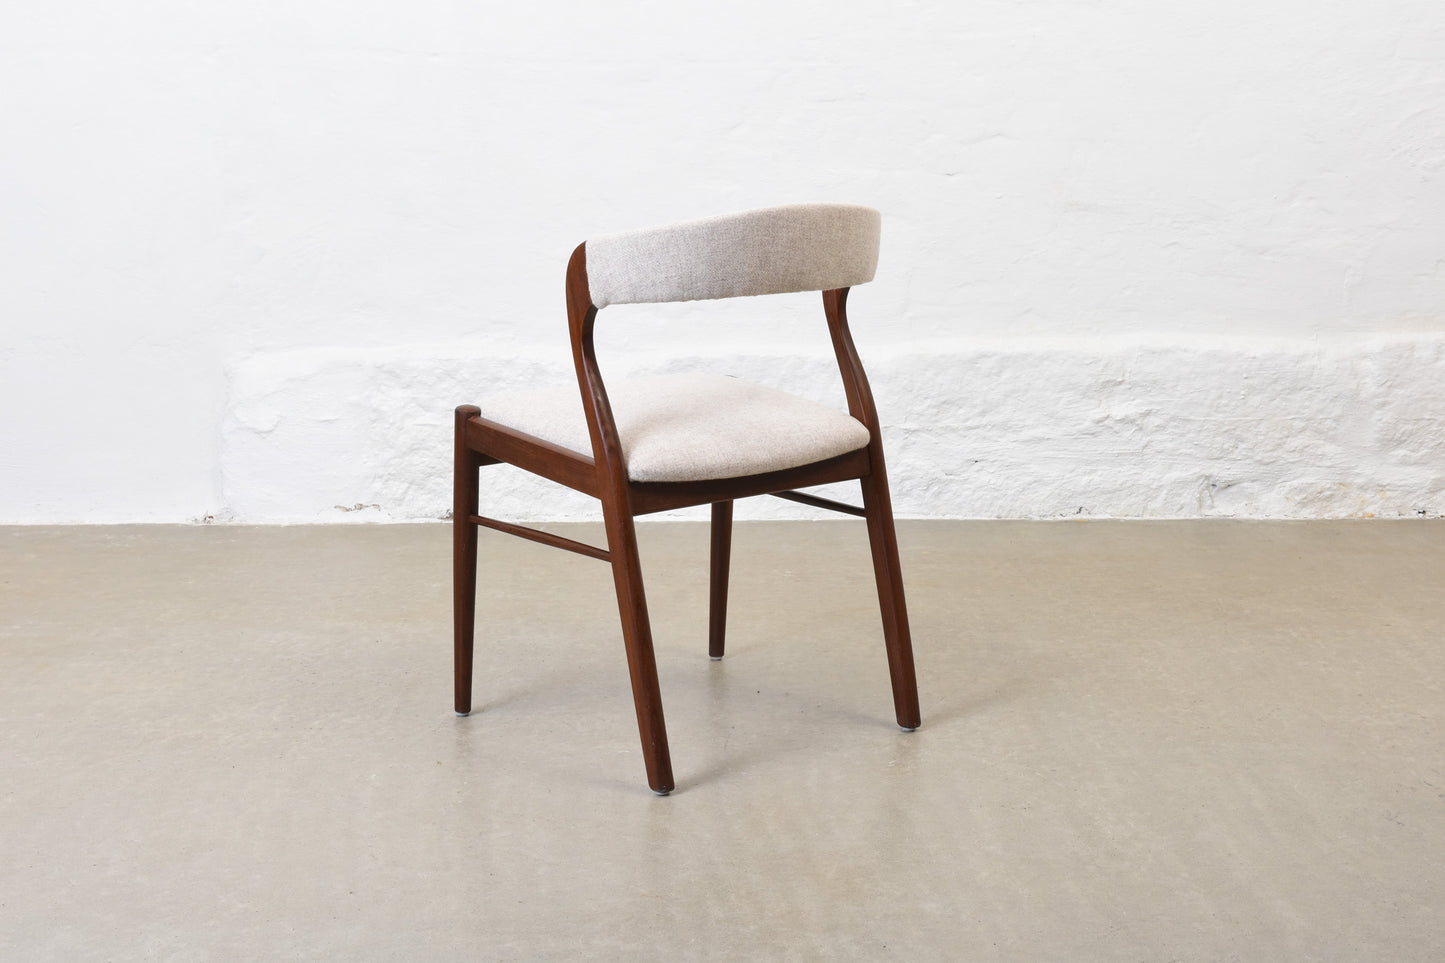 Two available: 1950s teak + felt chairs